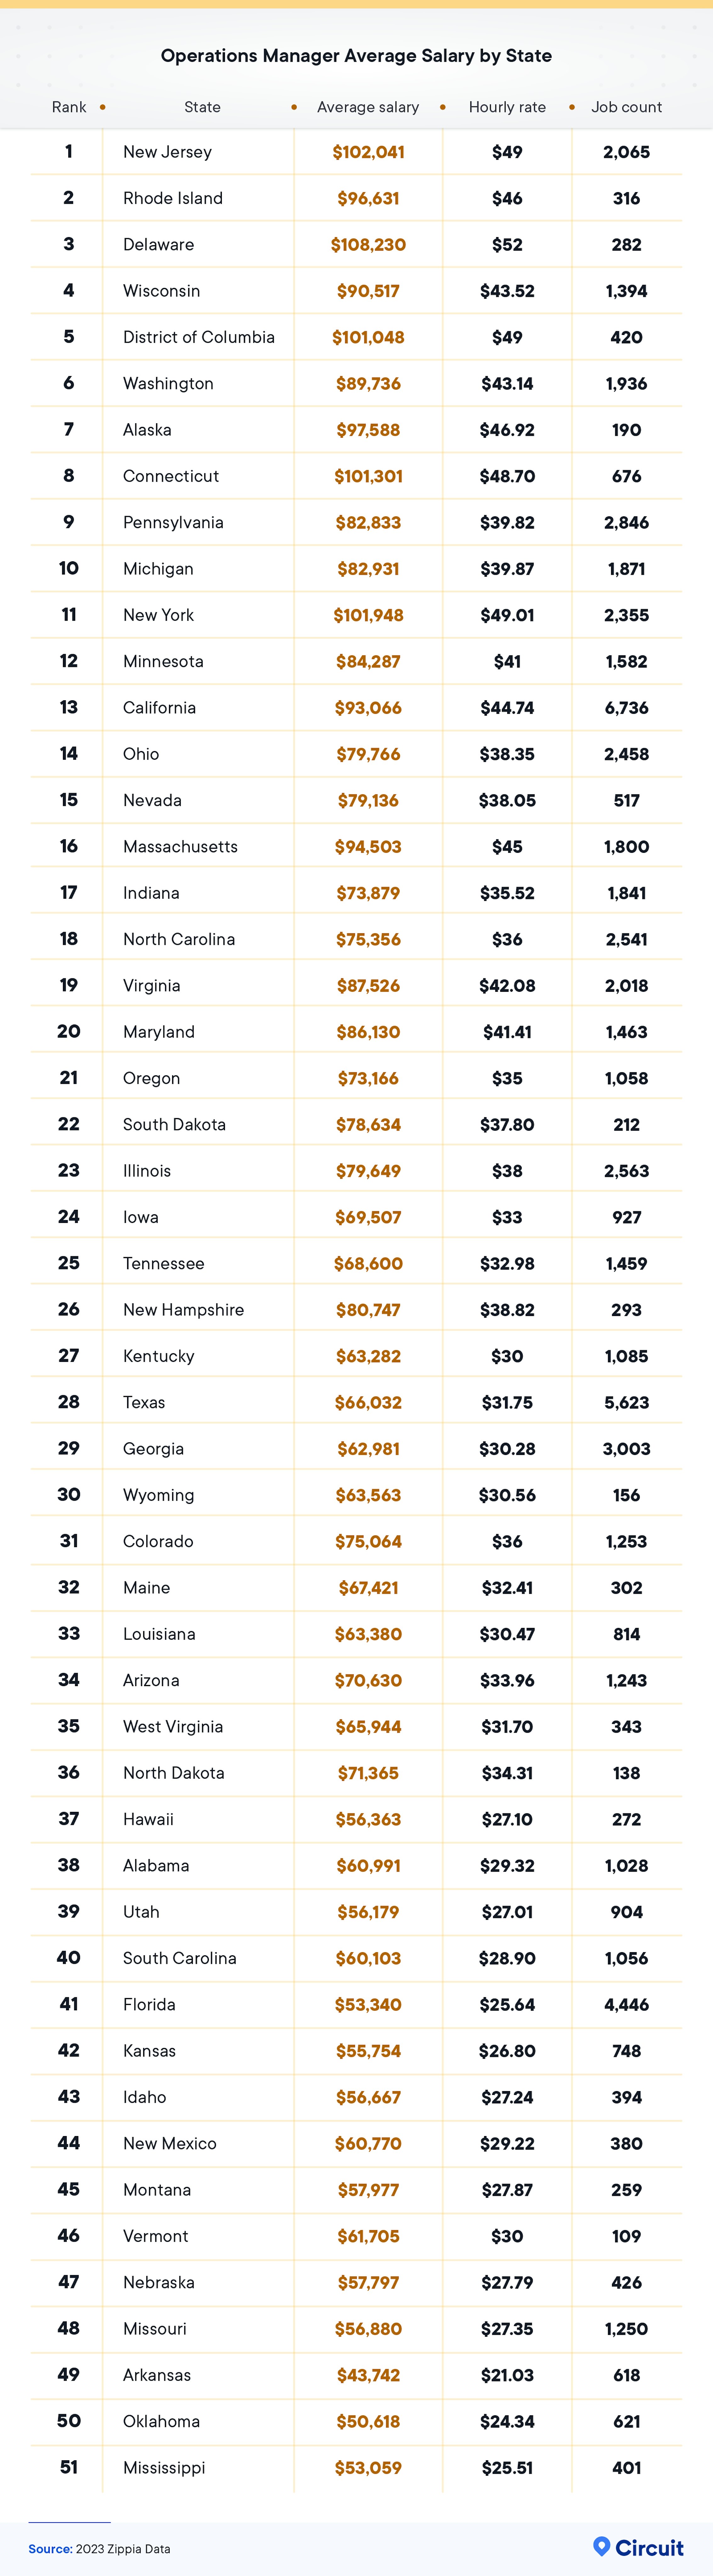 Operations manager average salary by state